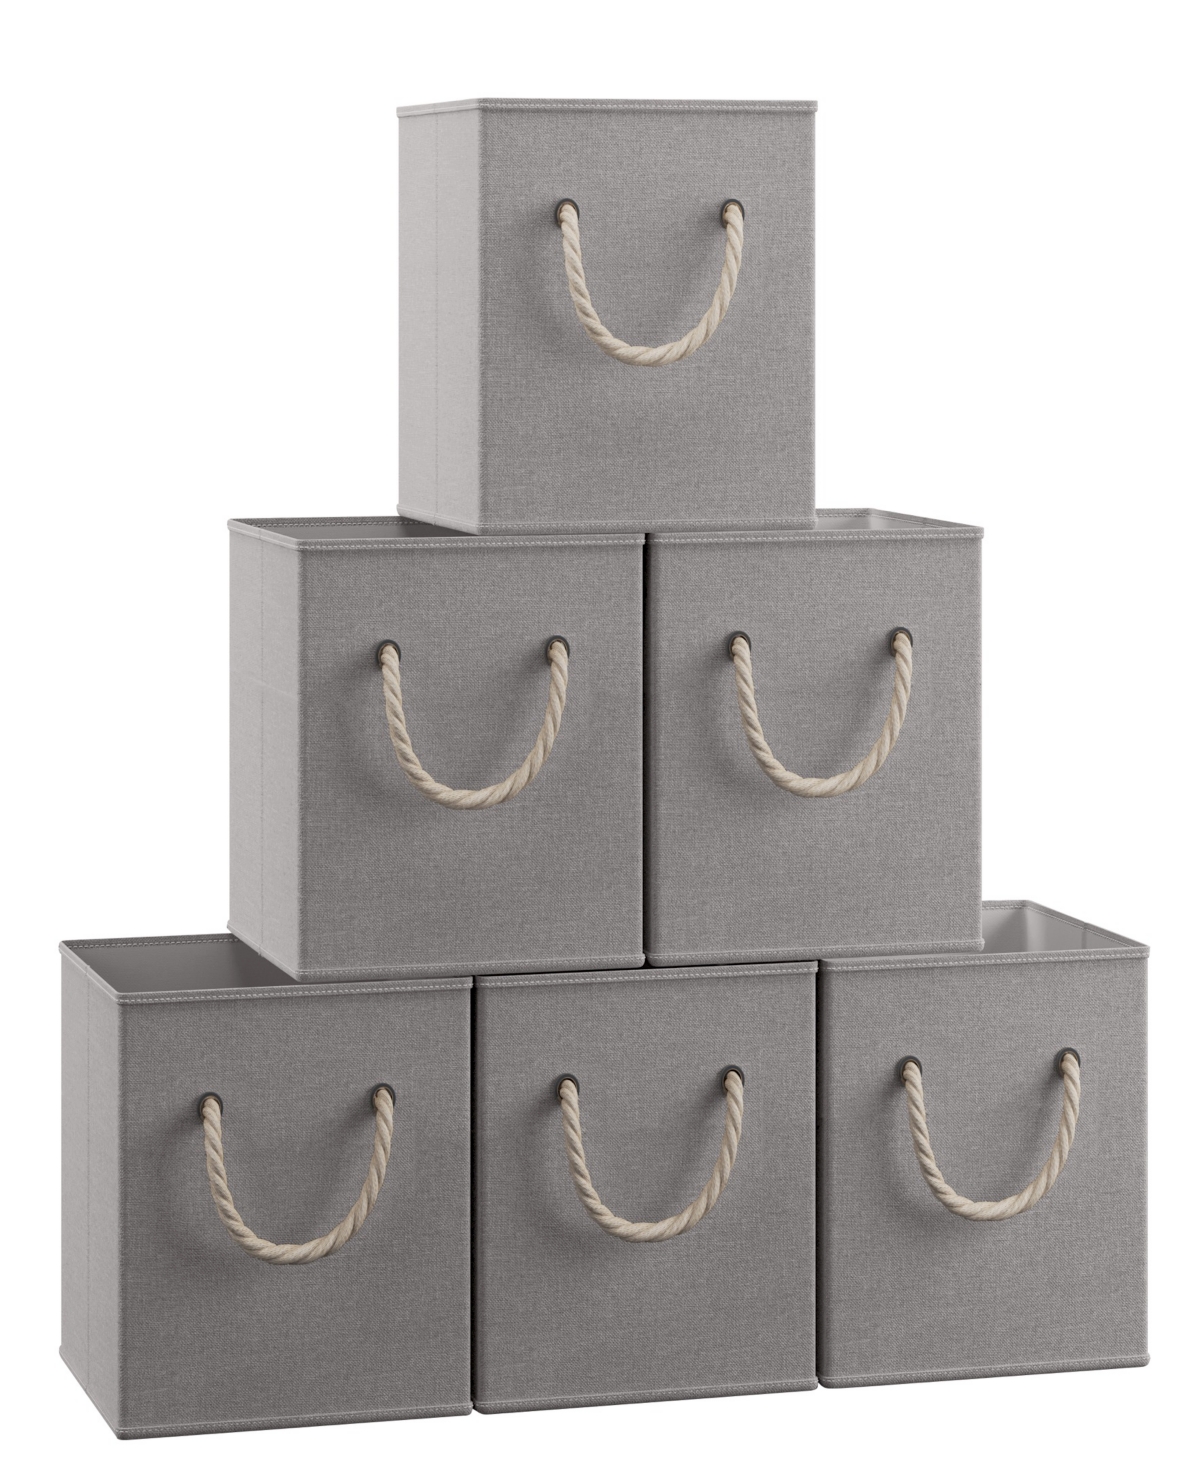 Ornavo Home Foldable Linen Storage Cube Bin With Rope Handles In Gray